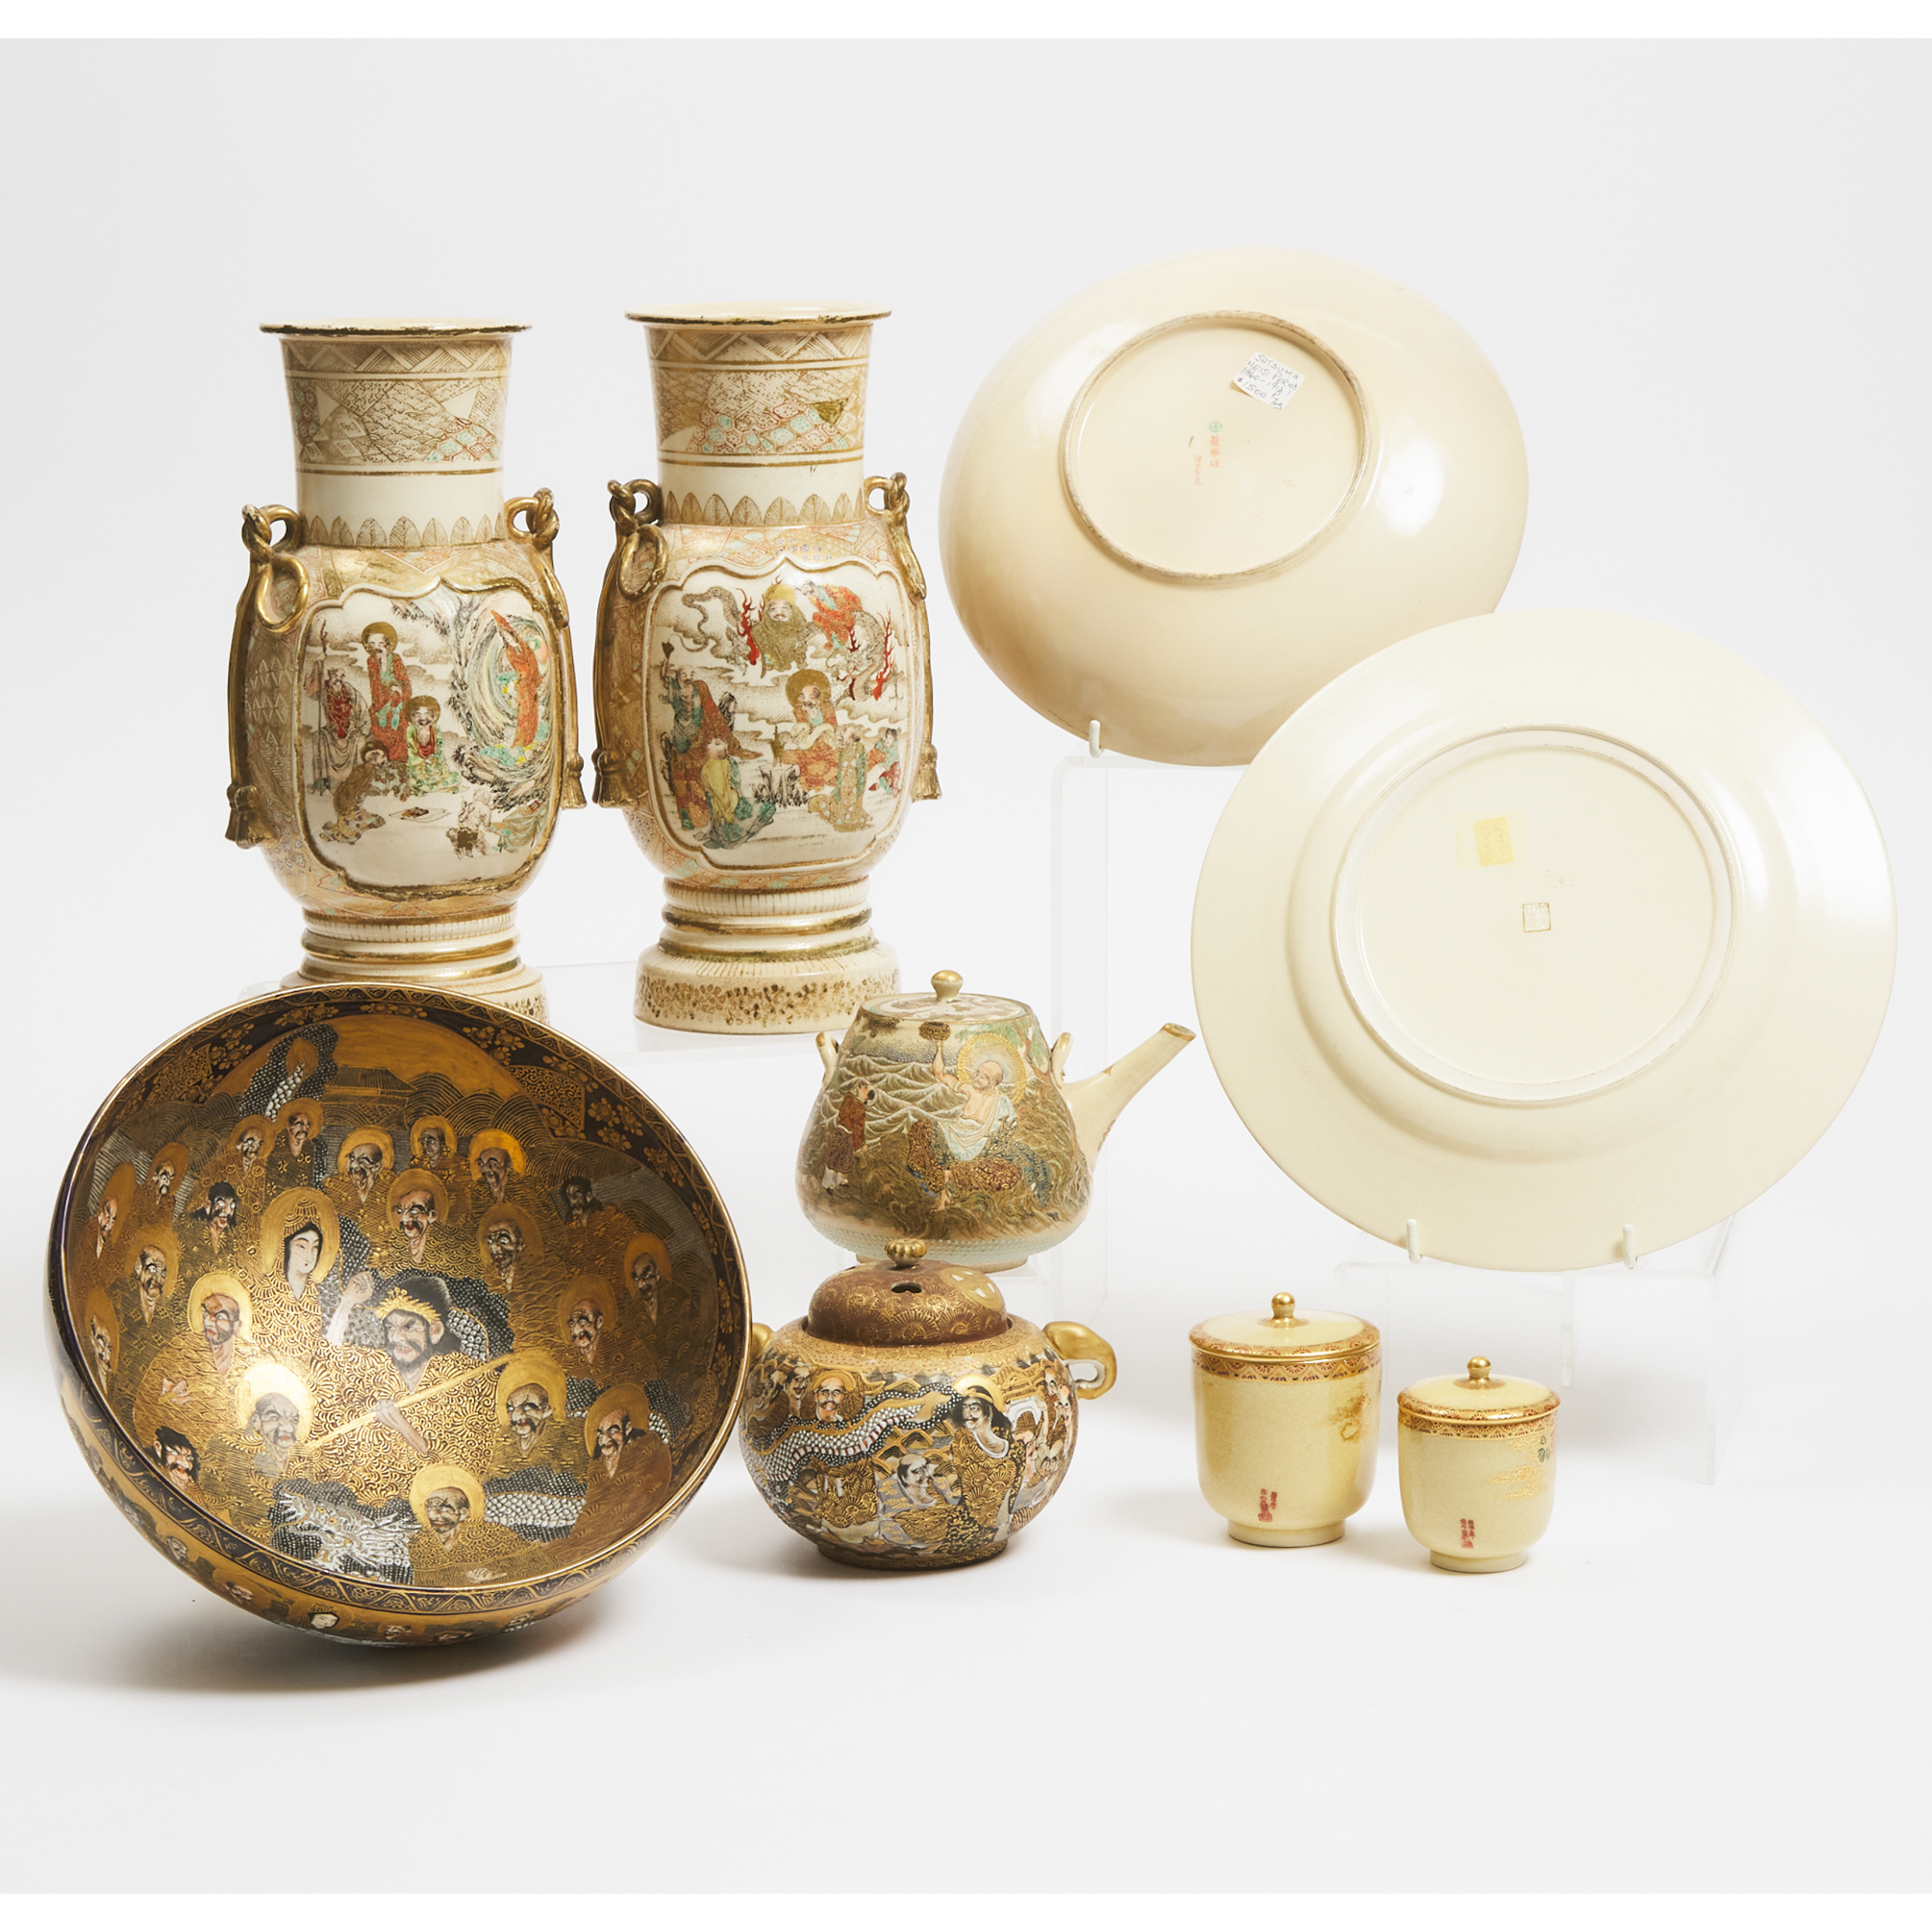 A Group of Nine Satsuma Wares, Late 19th/Early 20th Century